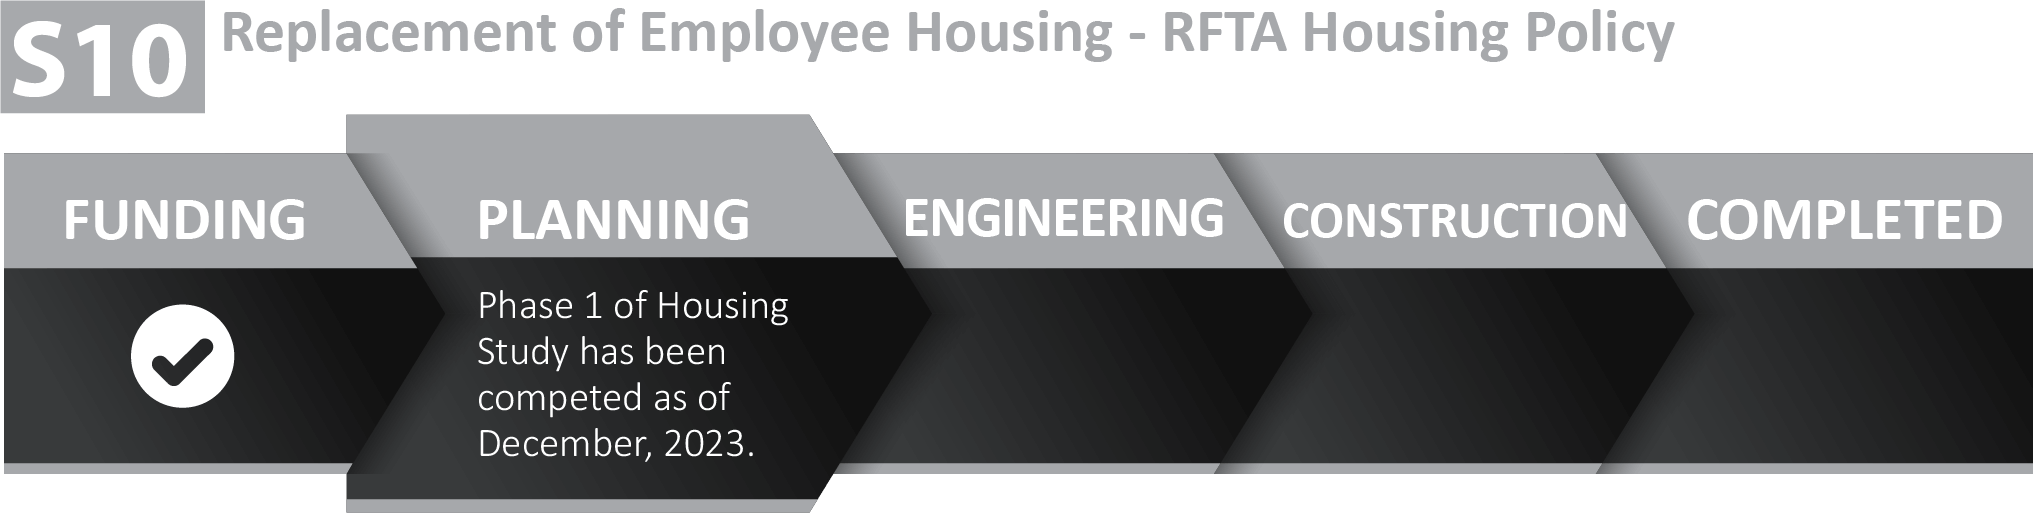 Graphic showing phase 1 of the RFTA housing study is complete as of December, 2023